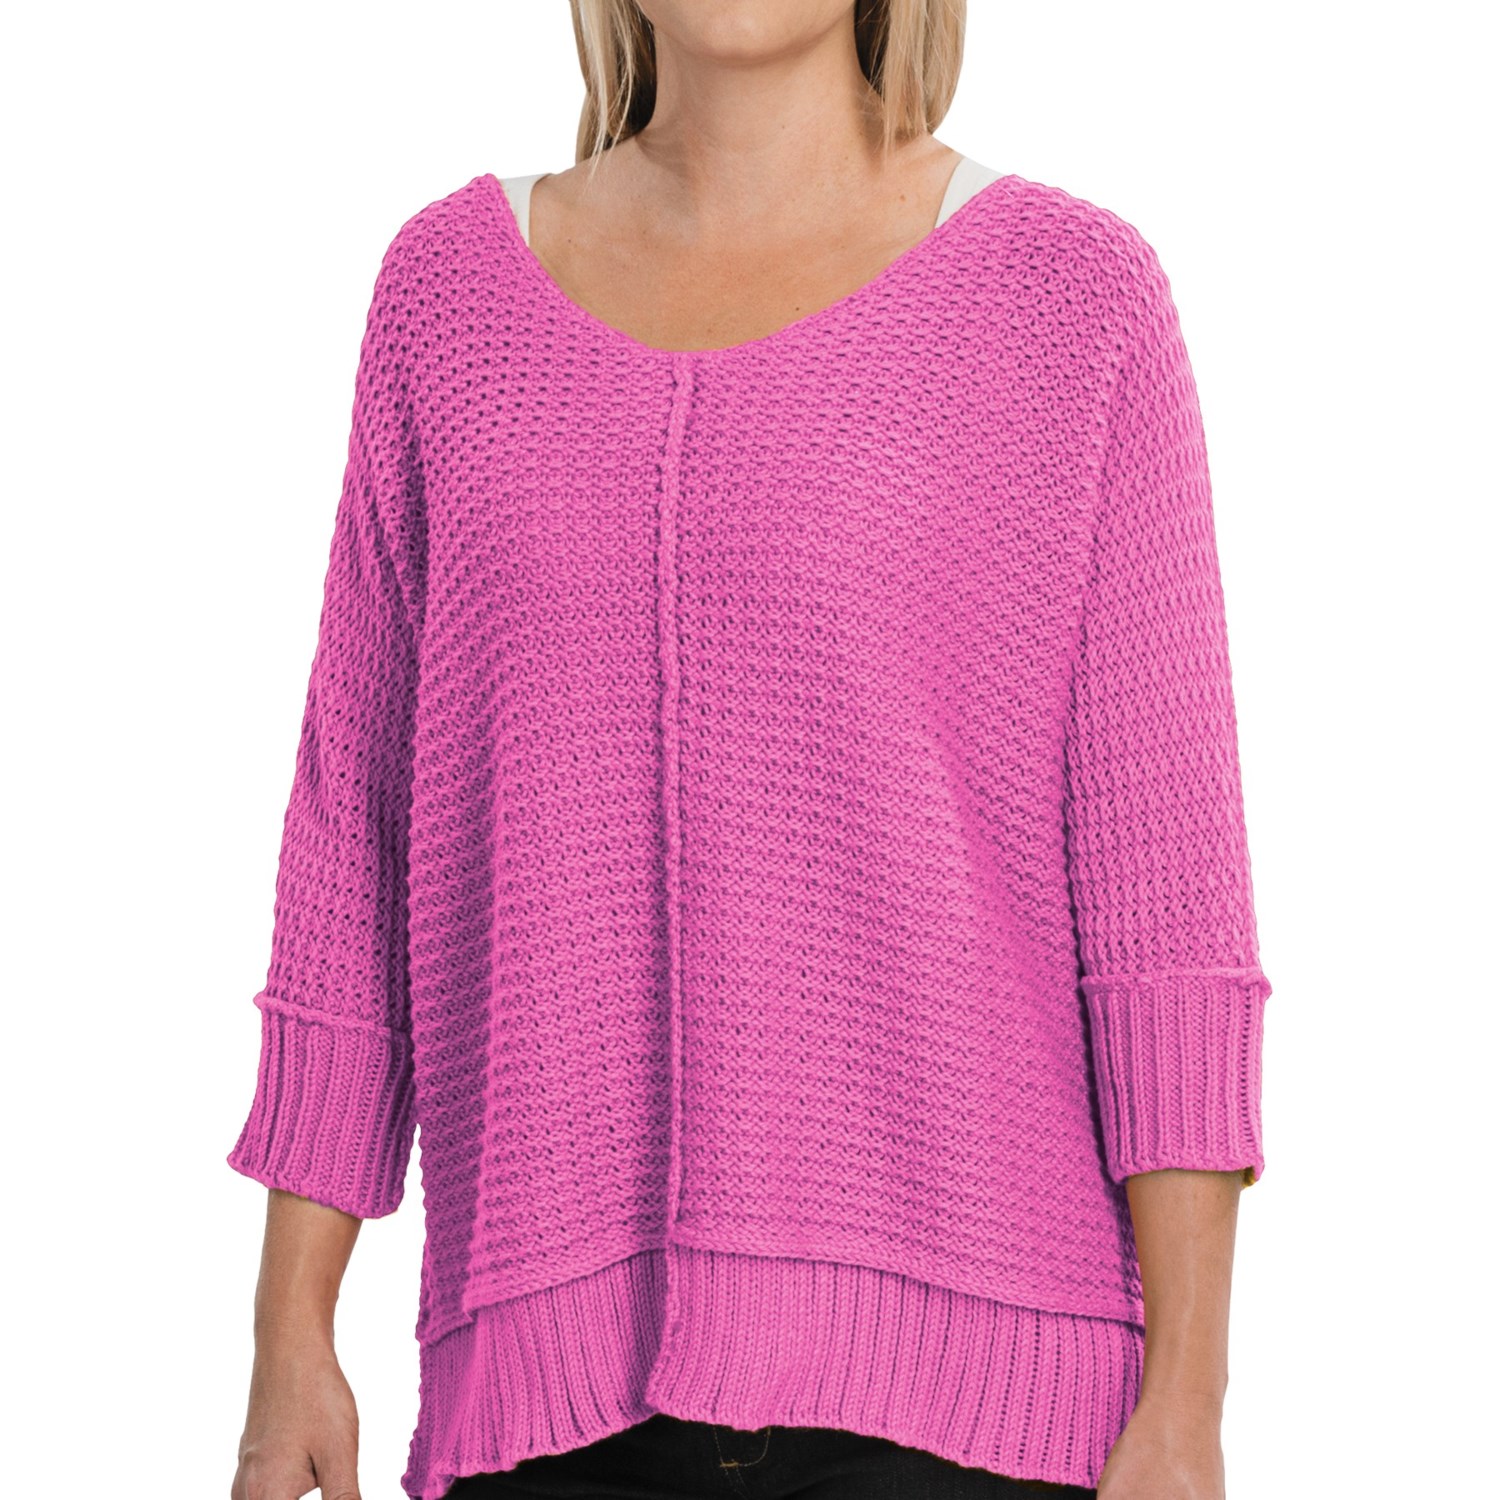 Pure Handknit Harbor Sweater - 3/4 Sleeve (For Women) in Craft Pink